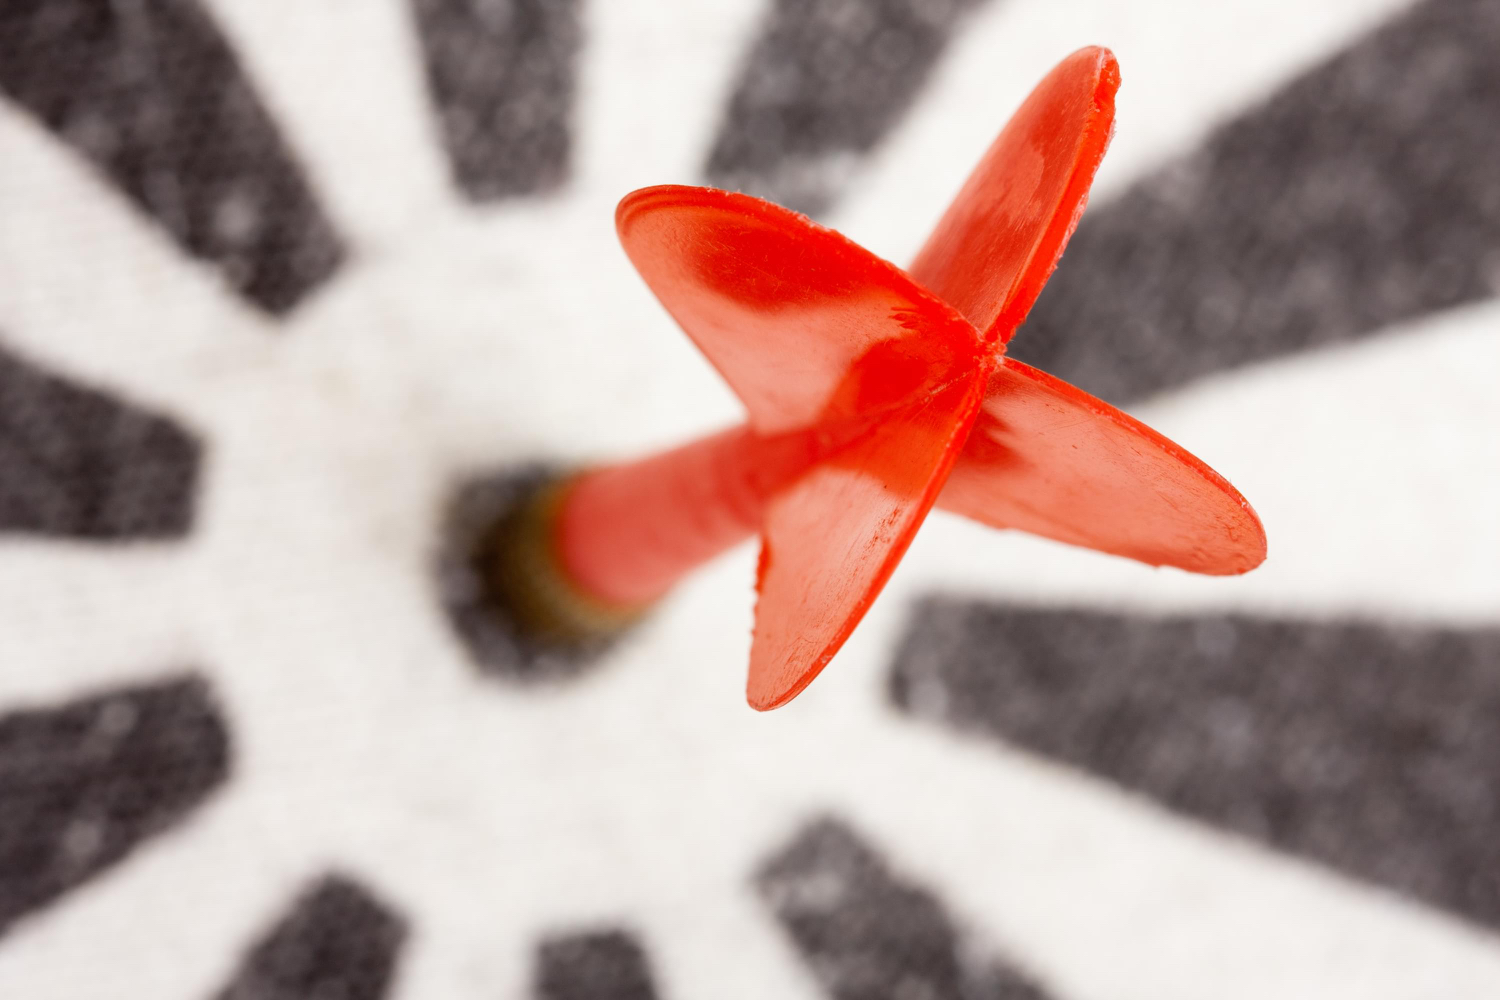 A close-up of a red dart hitting the bullseye, symbolizing achieving career goals with intention